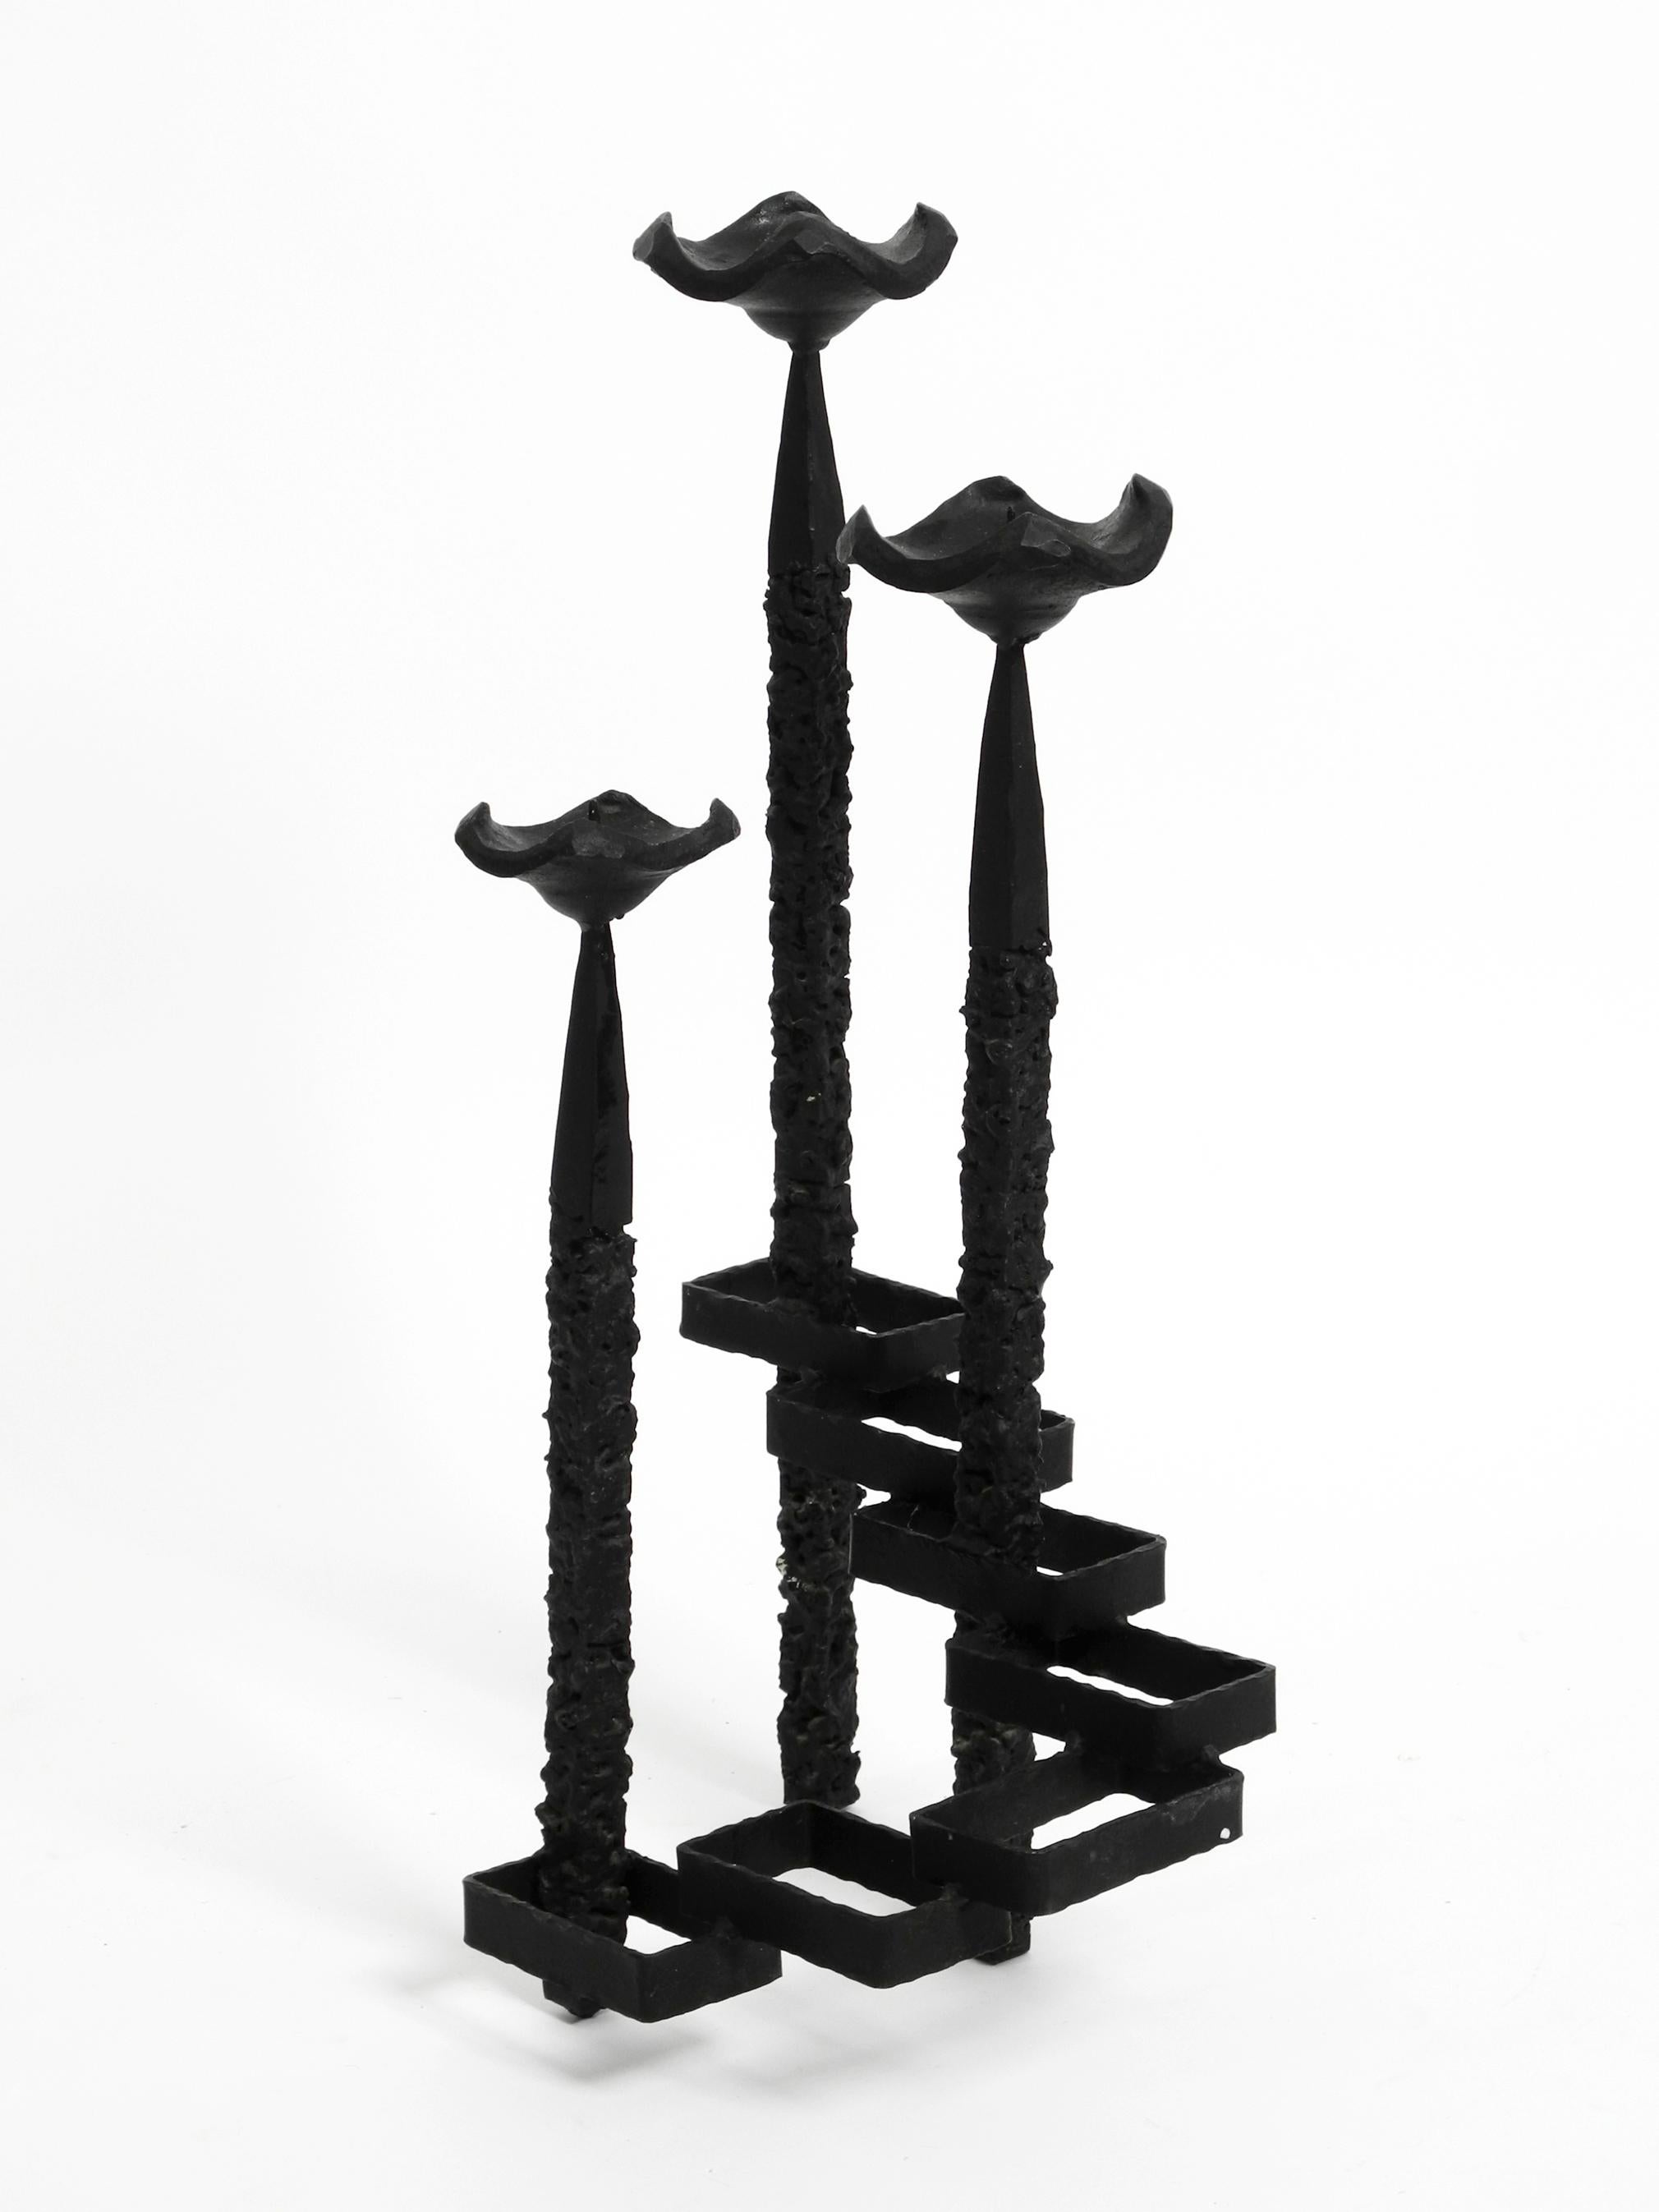 Extraordinary large floor or table candle holder made of wrought iron in abstract Brutalist design. 
For three candles.
The great, very high-quality design piece is 60 cm high without candles and weighs approx. 8 kg.
Very stable hold without